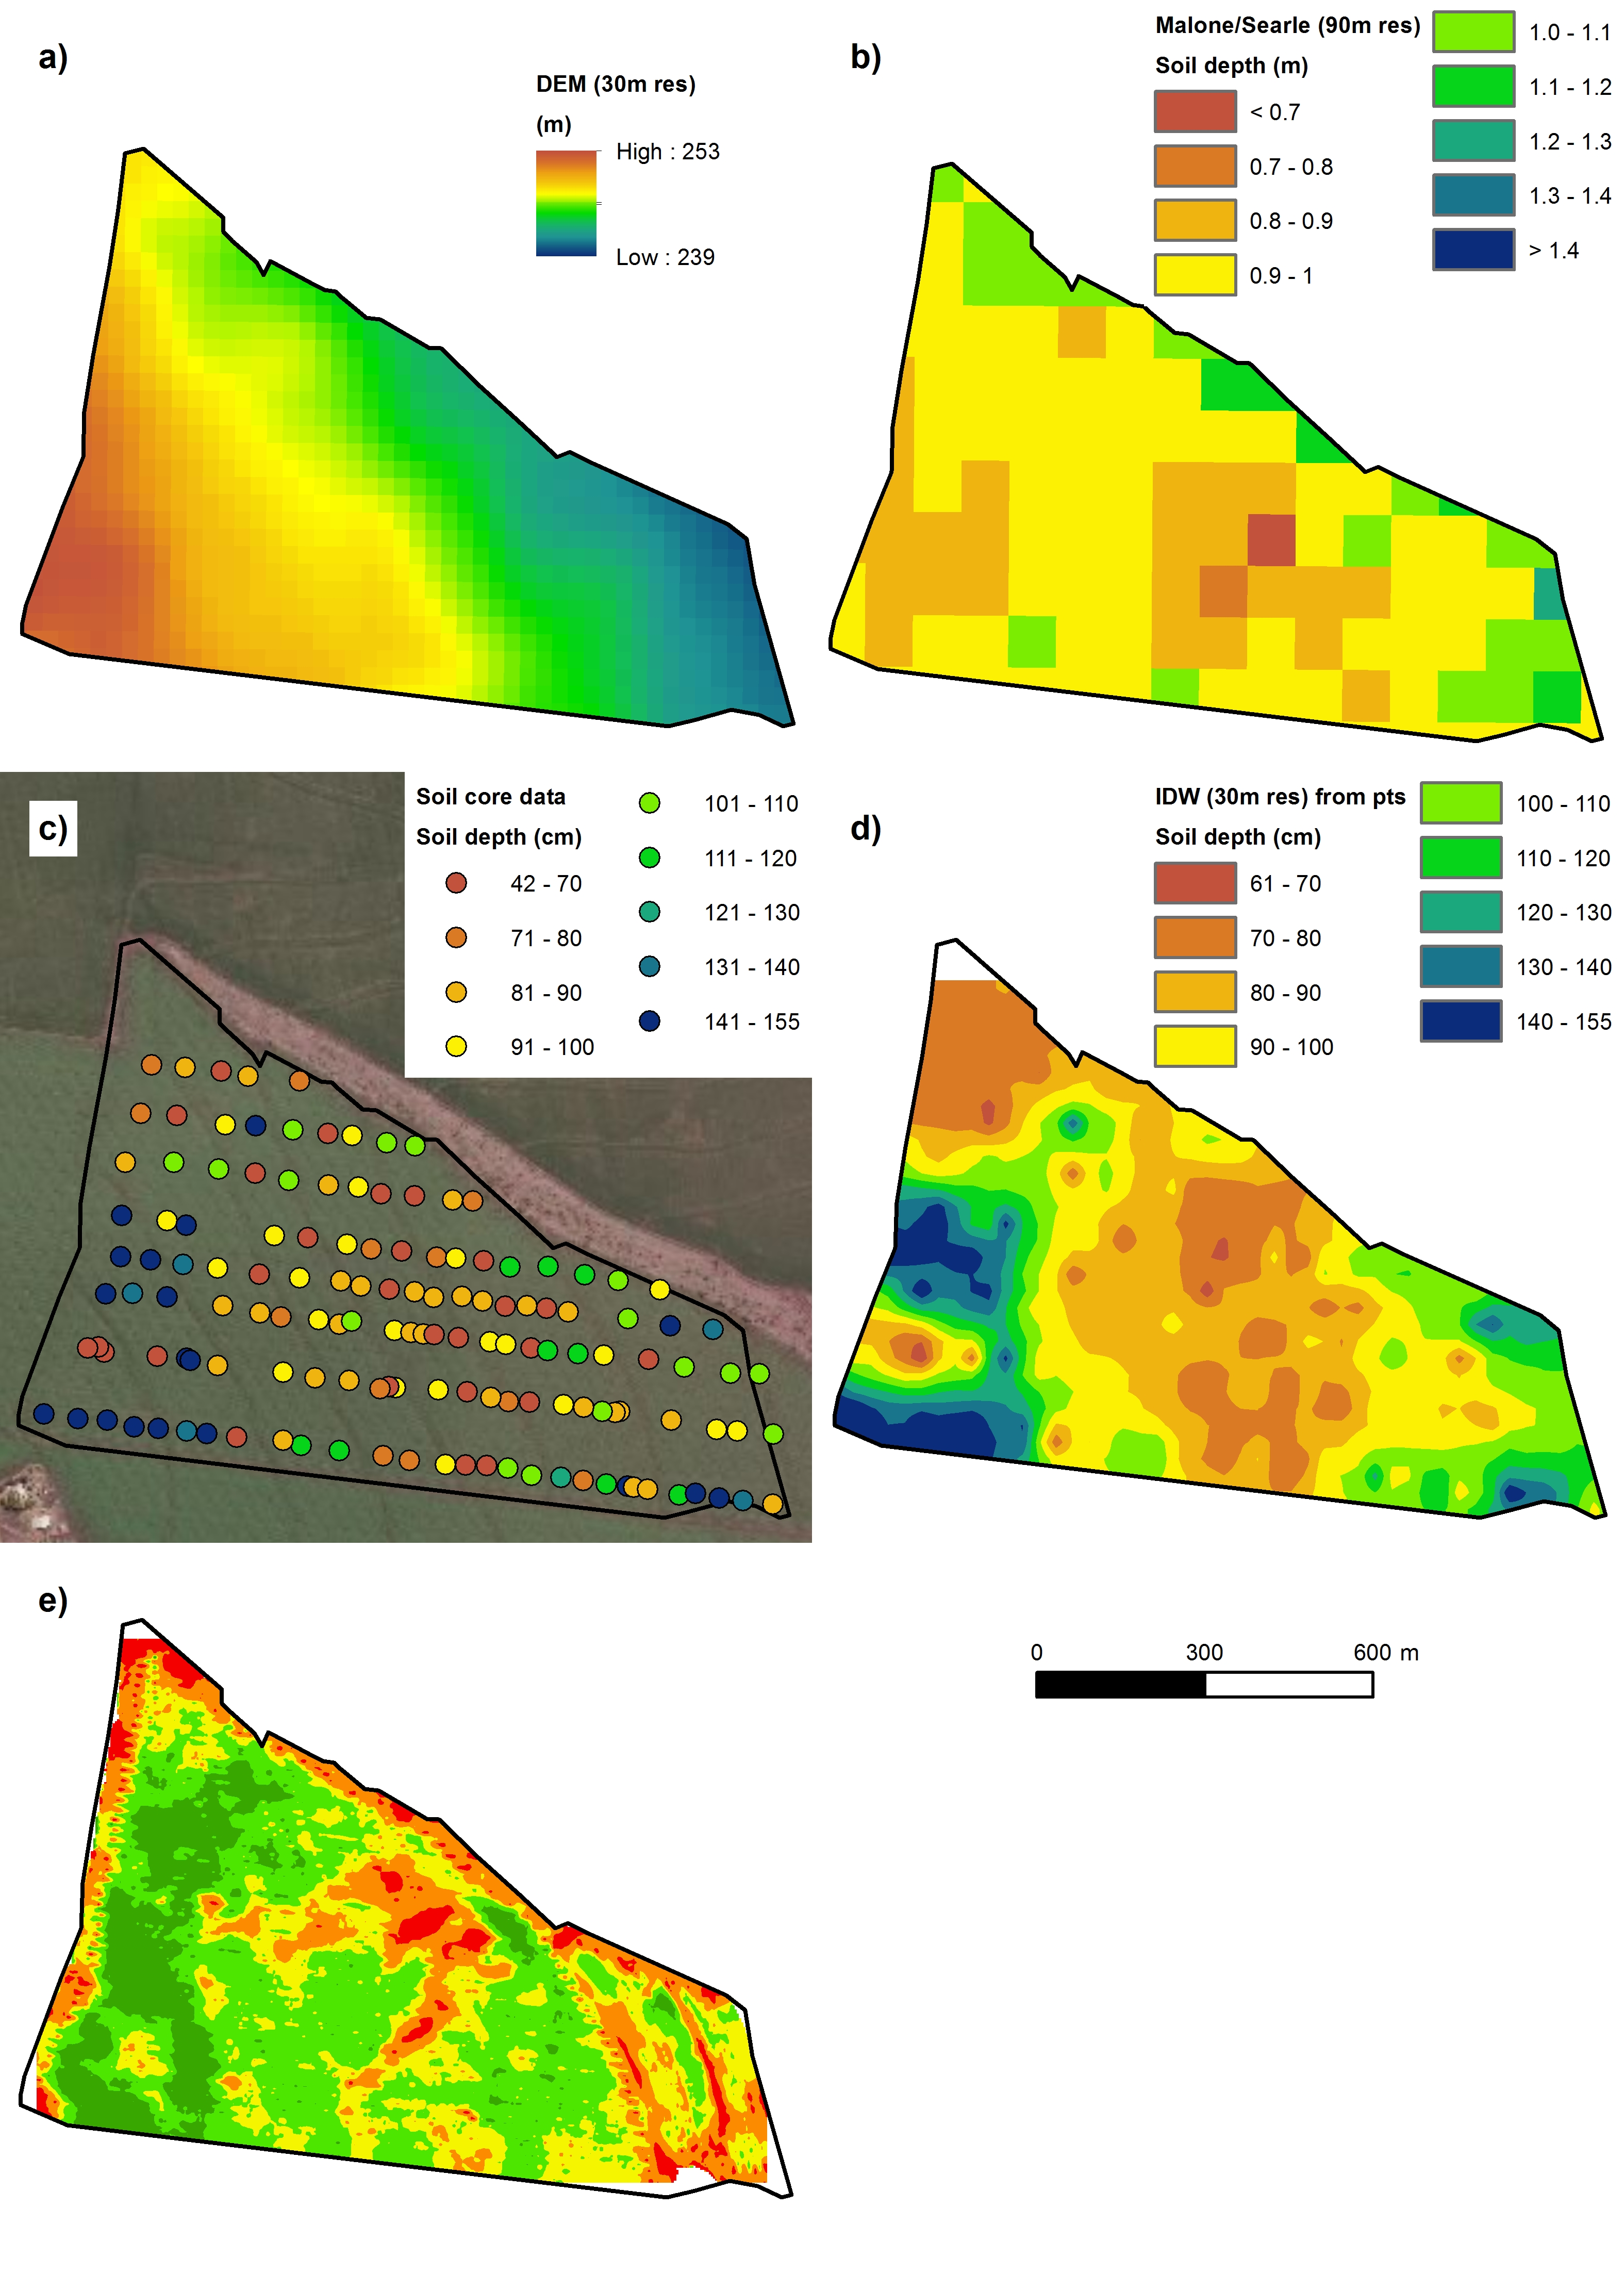 These five variations of a map show (a) Digital elevation model, (b) soil depth predicted by the national soil depth model of Malone and Searle (2020), (c) observed soil depths (data from Lynch and Dougall, 2007), (d) interpolated soil depth data and (e) yield map for the 2006 sorghum crop (data from Lynch and Dougall, 2007)